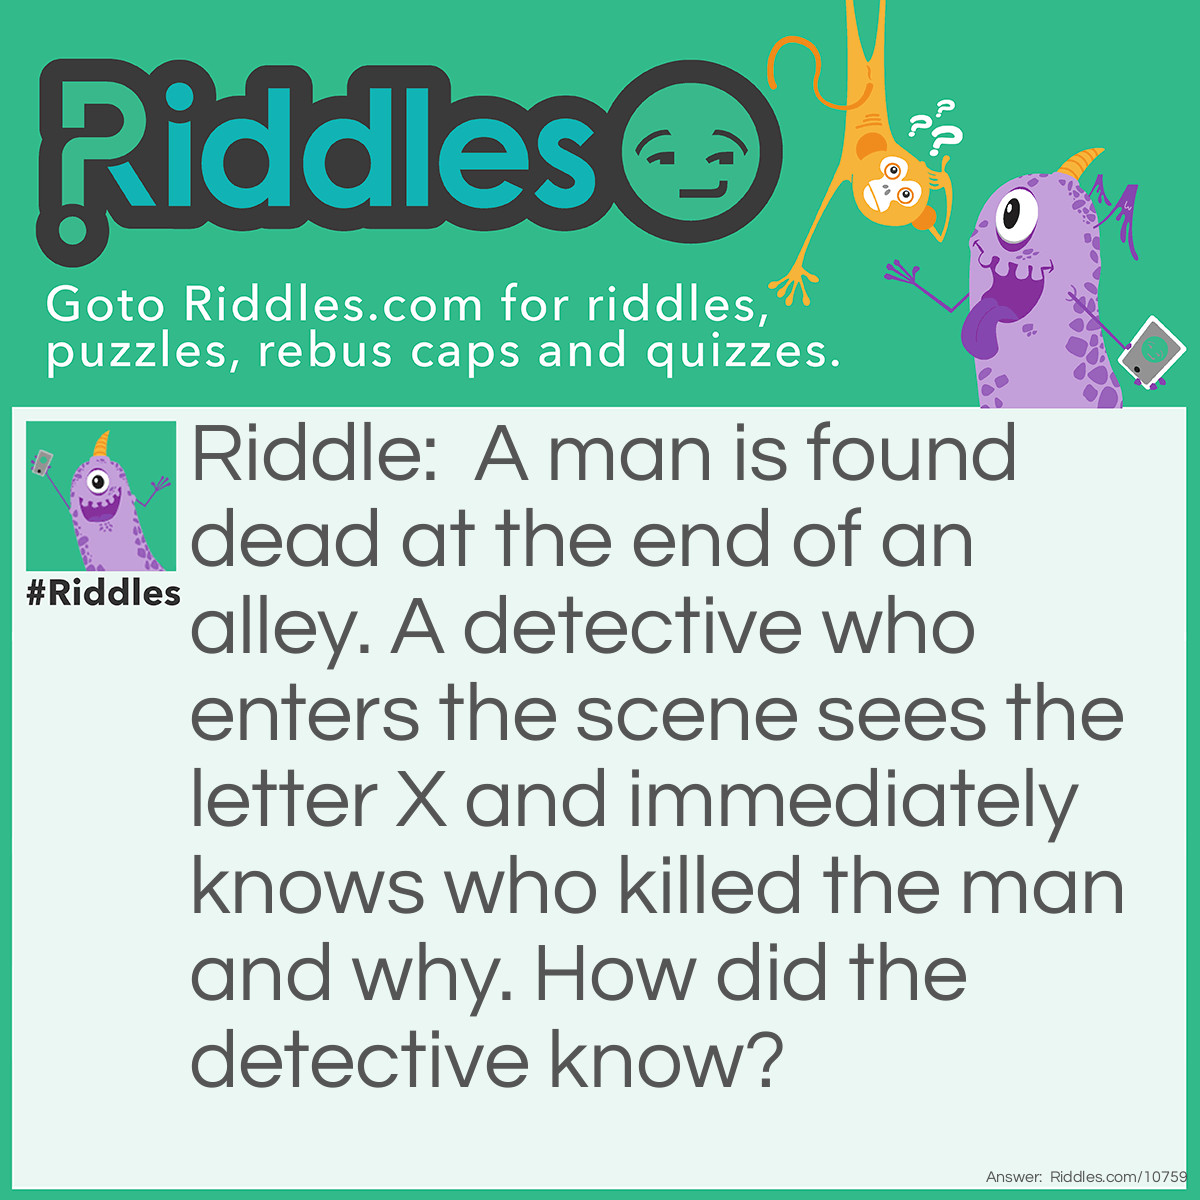 Riddle: A man is found dead at the end of an alley. A detective who enters the scene sees the letter X and immediately knows who killed the man and why. How did the detective know? Answer: This was a bowling alley, and the man who died was a pin spotter. A player had a strike and was to bowl again, but he bowled too soon before the pin spotter was clear. The X is on the score sheet and this tells the detective the name of the bowler.